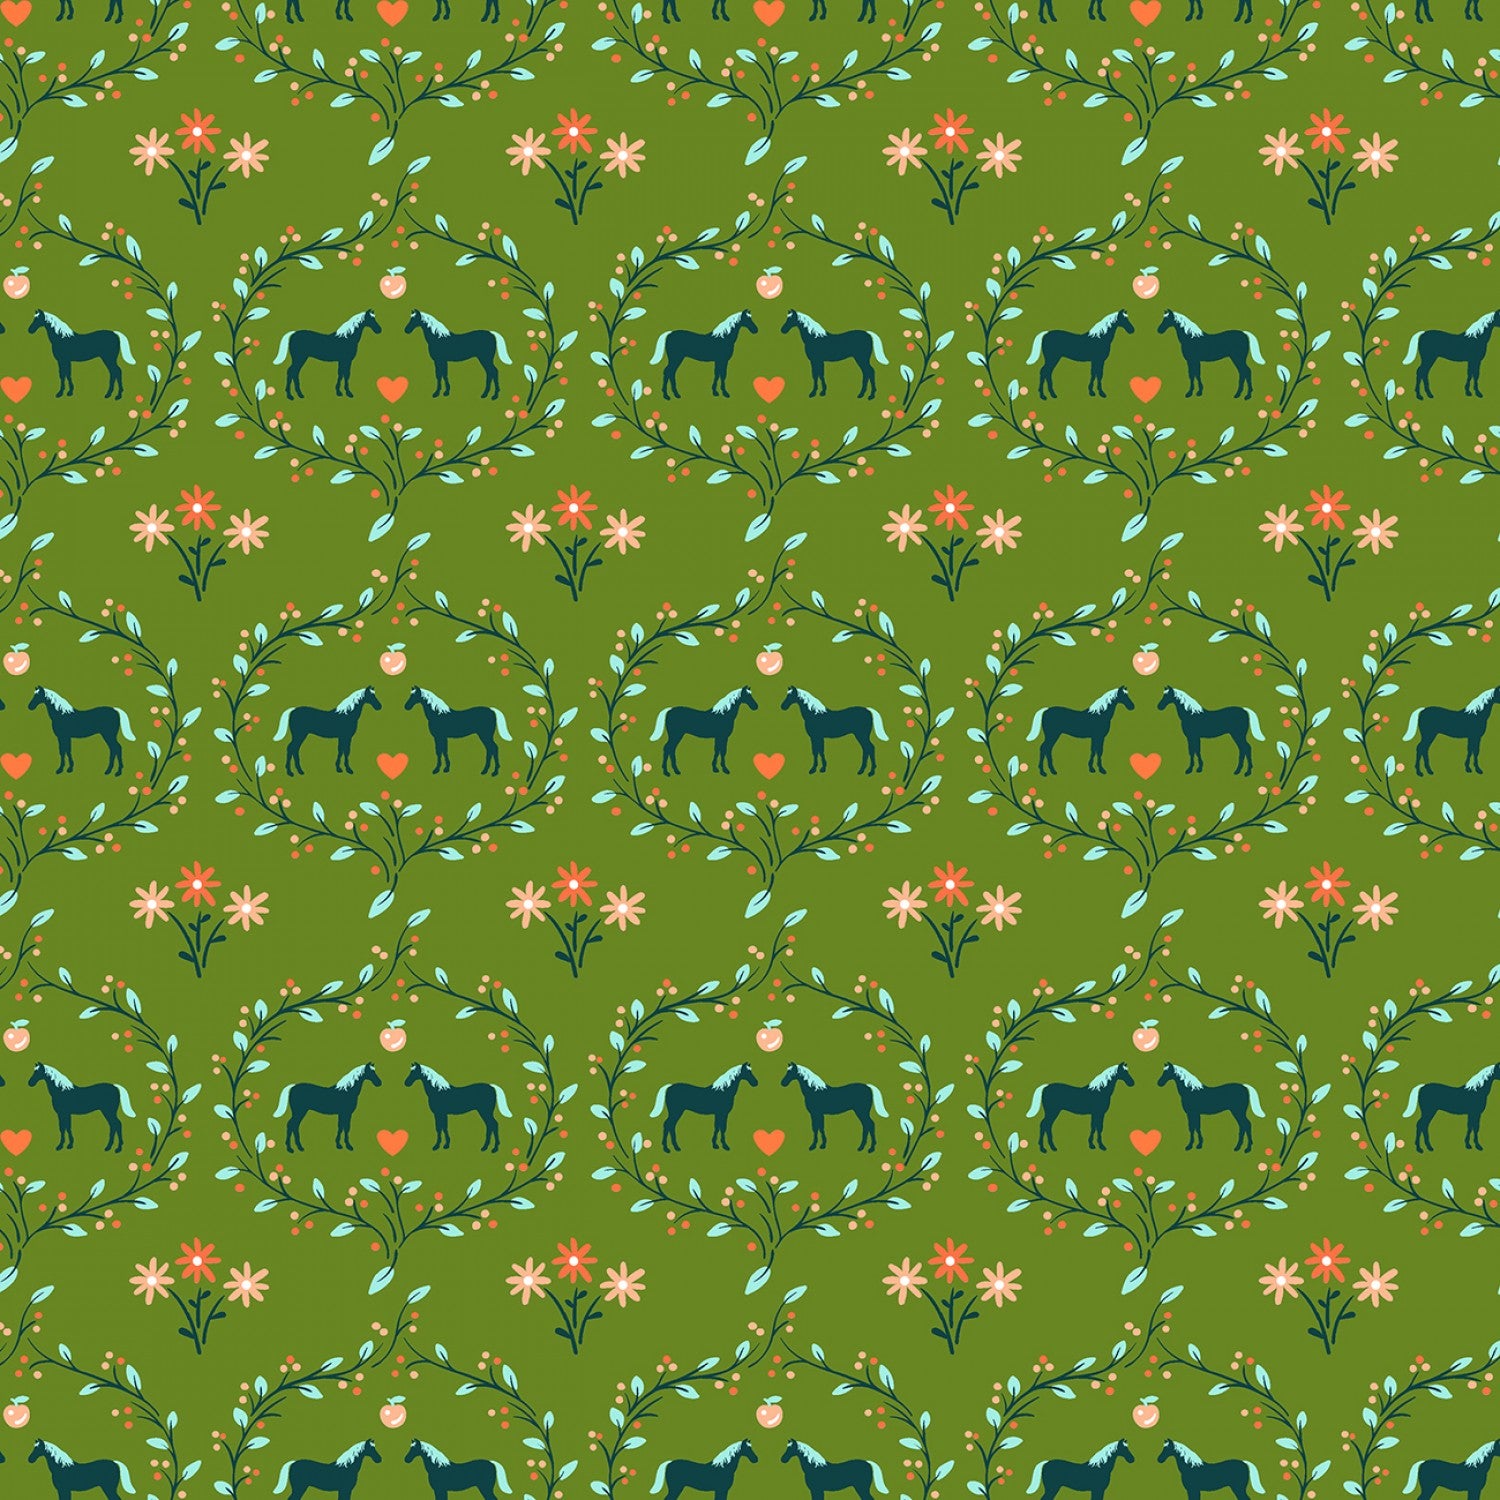 Cottage Farm Moss Best Friend Yardage by Judy Jarvi for Windham Fabric ...